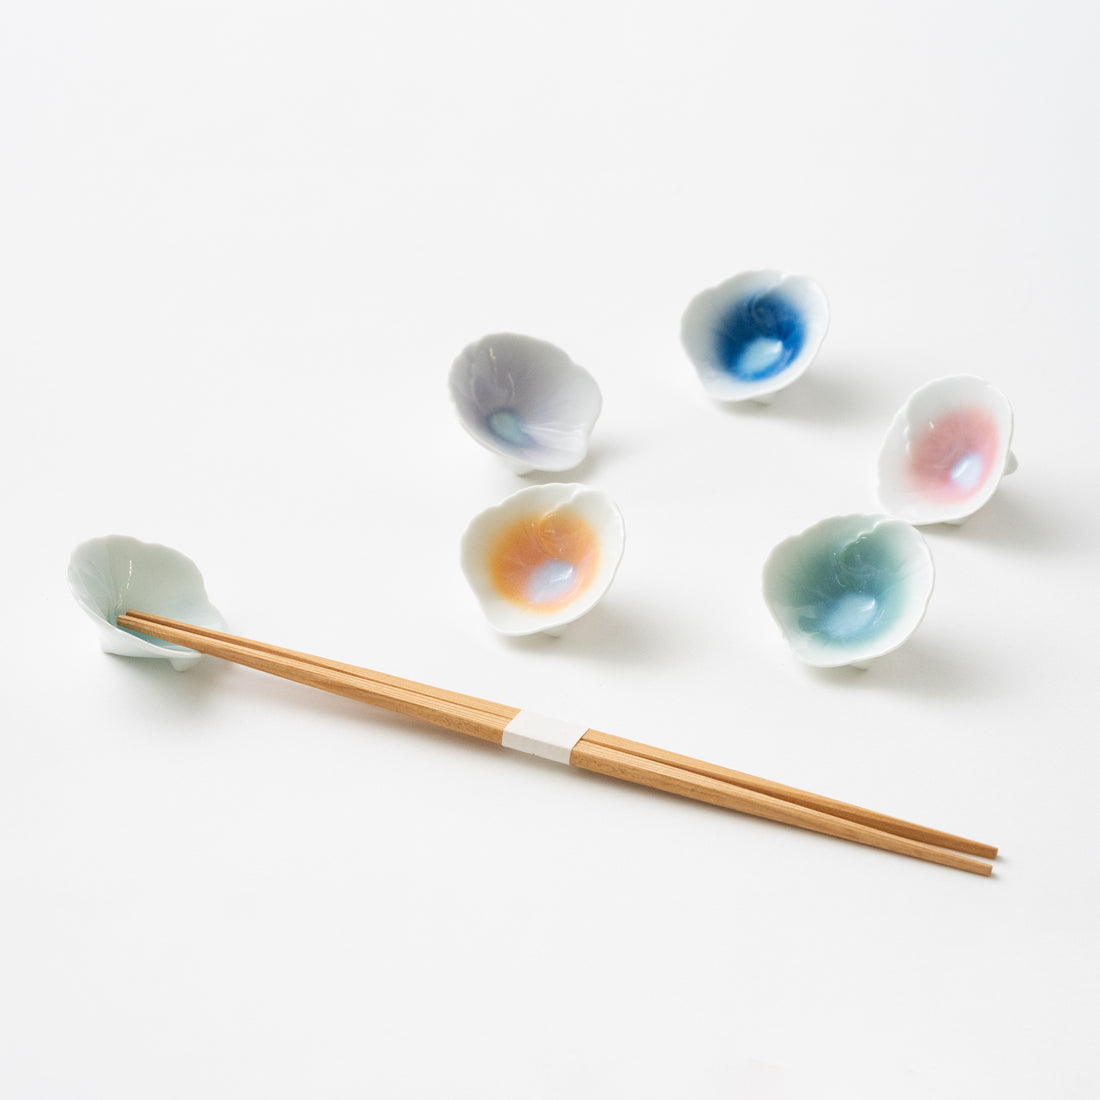 Ceramic chopstick rests in the shape of a flower. Colors in blue, orange, green, pink and lavender. Comes in a wooden box